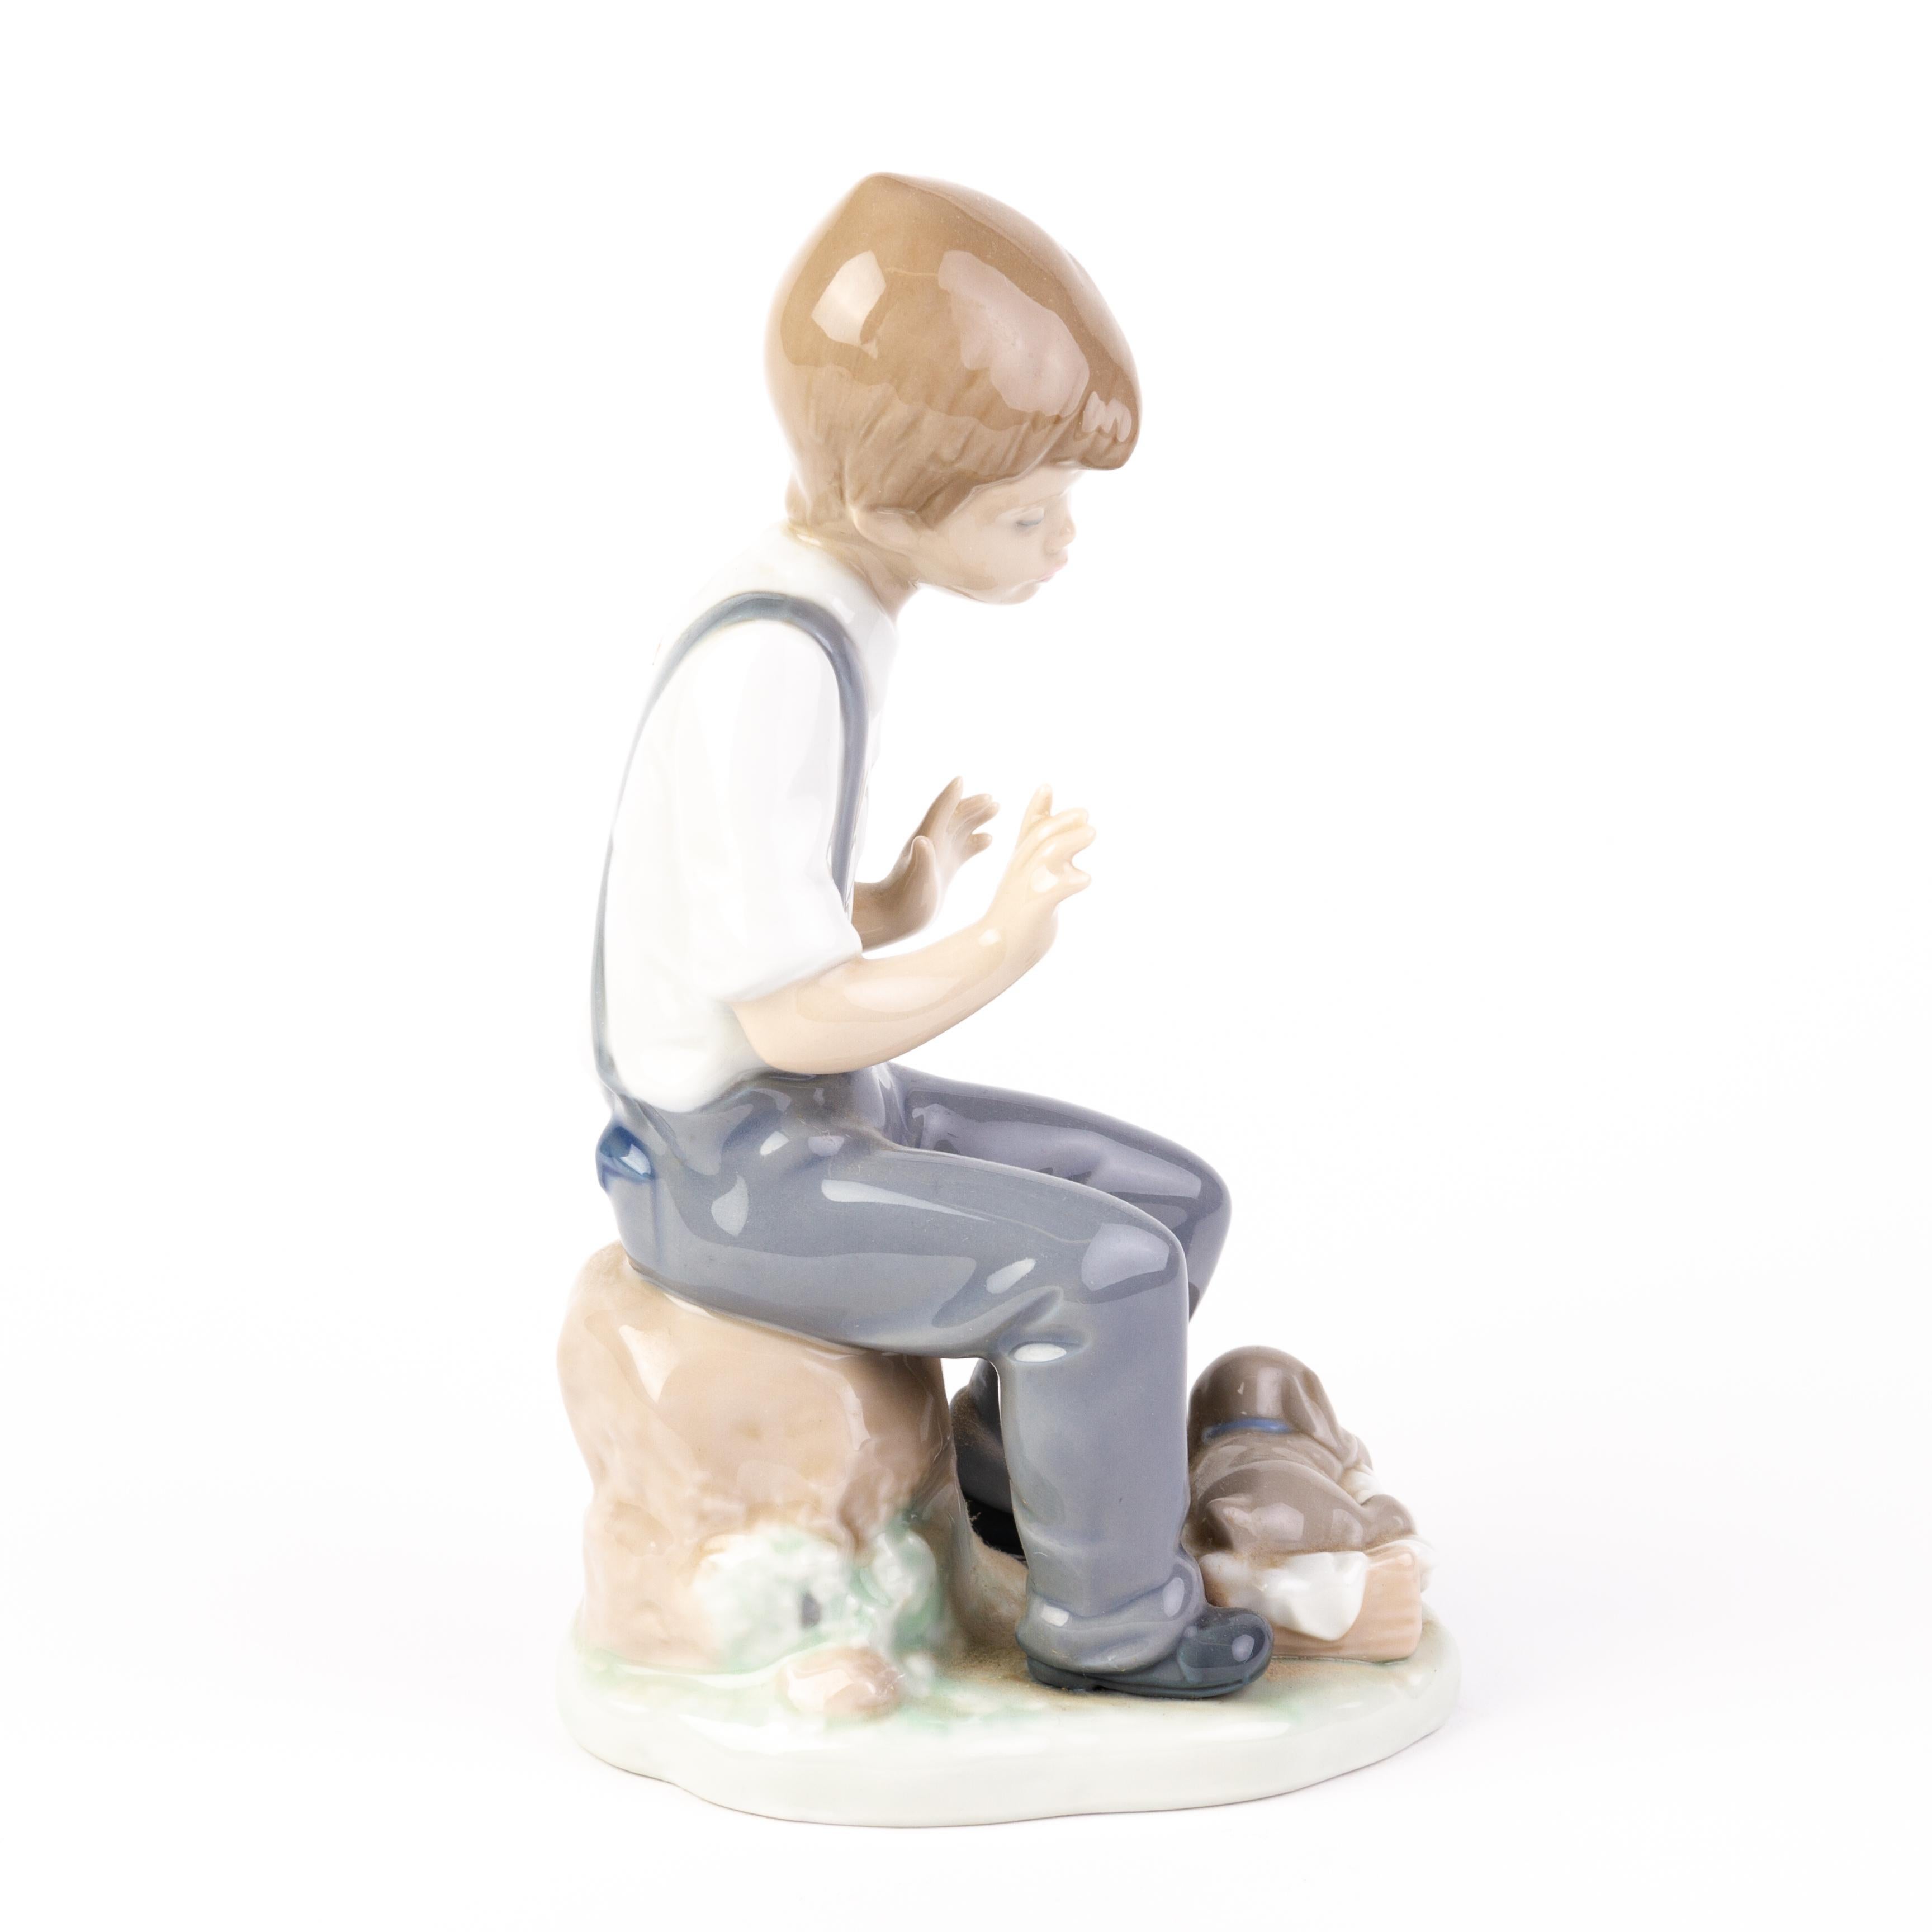 In good condition
From a private collection
Free international shipping
Nao Lladro Fine Porcelain Figure 